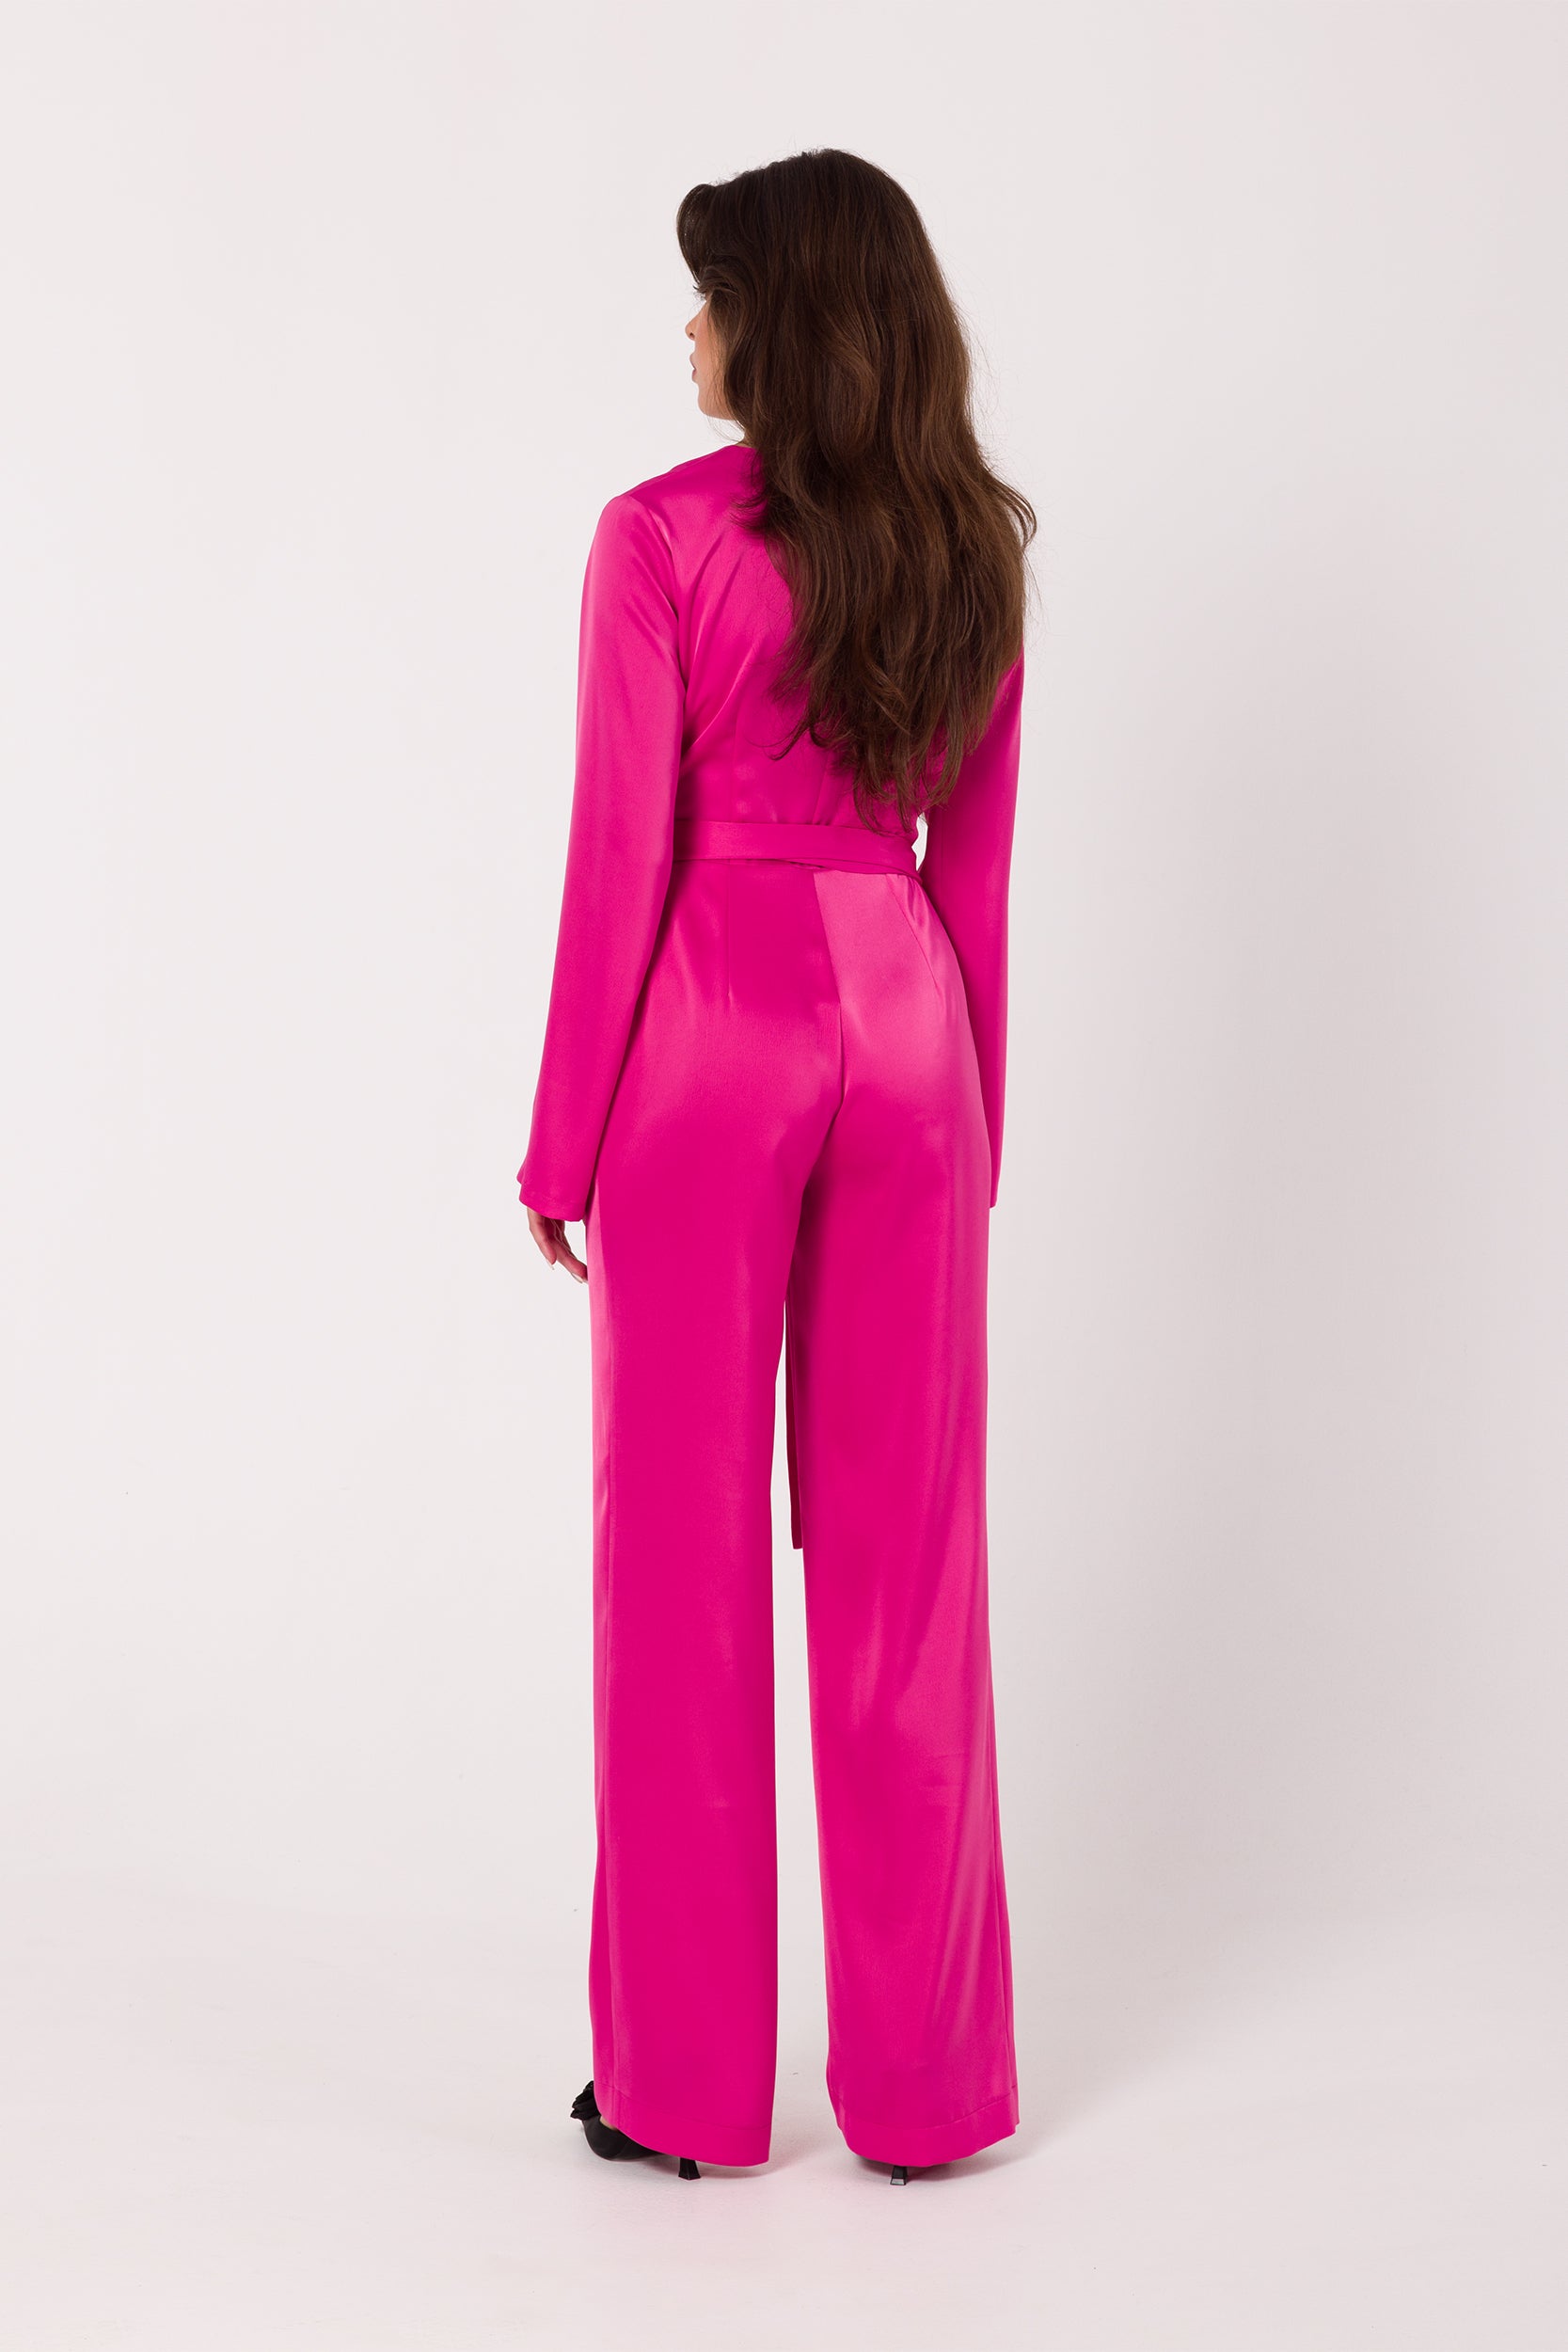 Long Sleeve Pink Satin Jumpsuit | Strictly In | Make a statement at your next event with our Long Sleeve Satin Jumpsuit. Crafted from luxurious satin, it features a V-neck, long sleeves, and a tied waist for a glamorous yet comfortable look. Perfect for the party season.